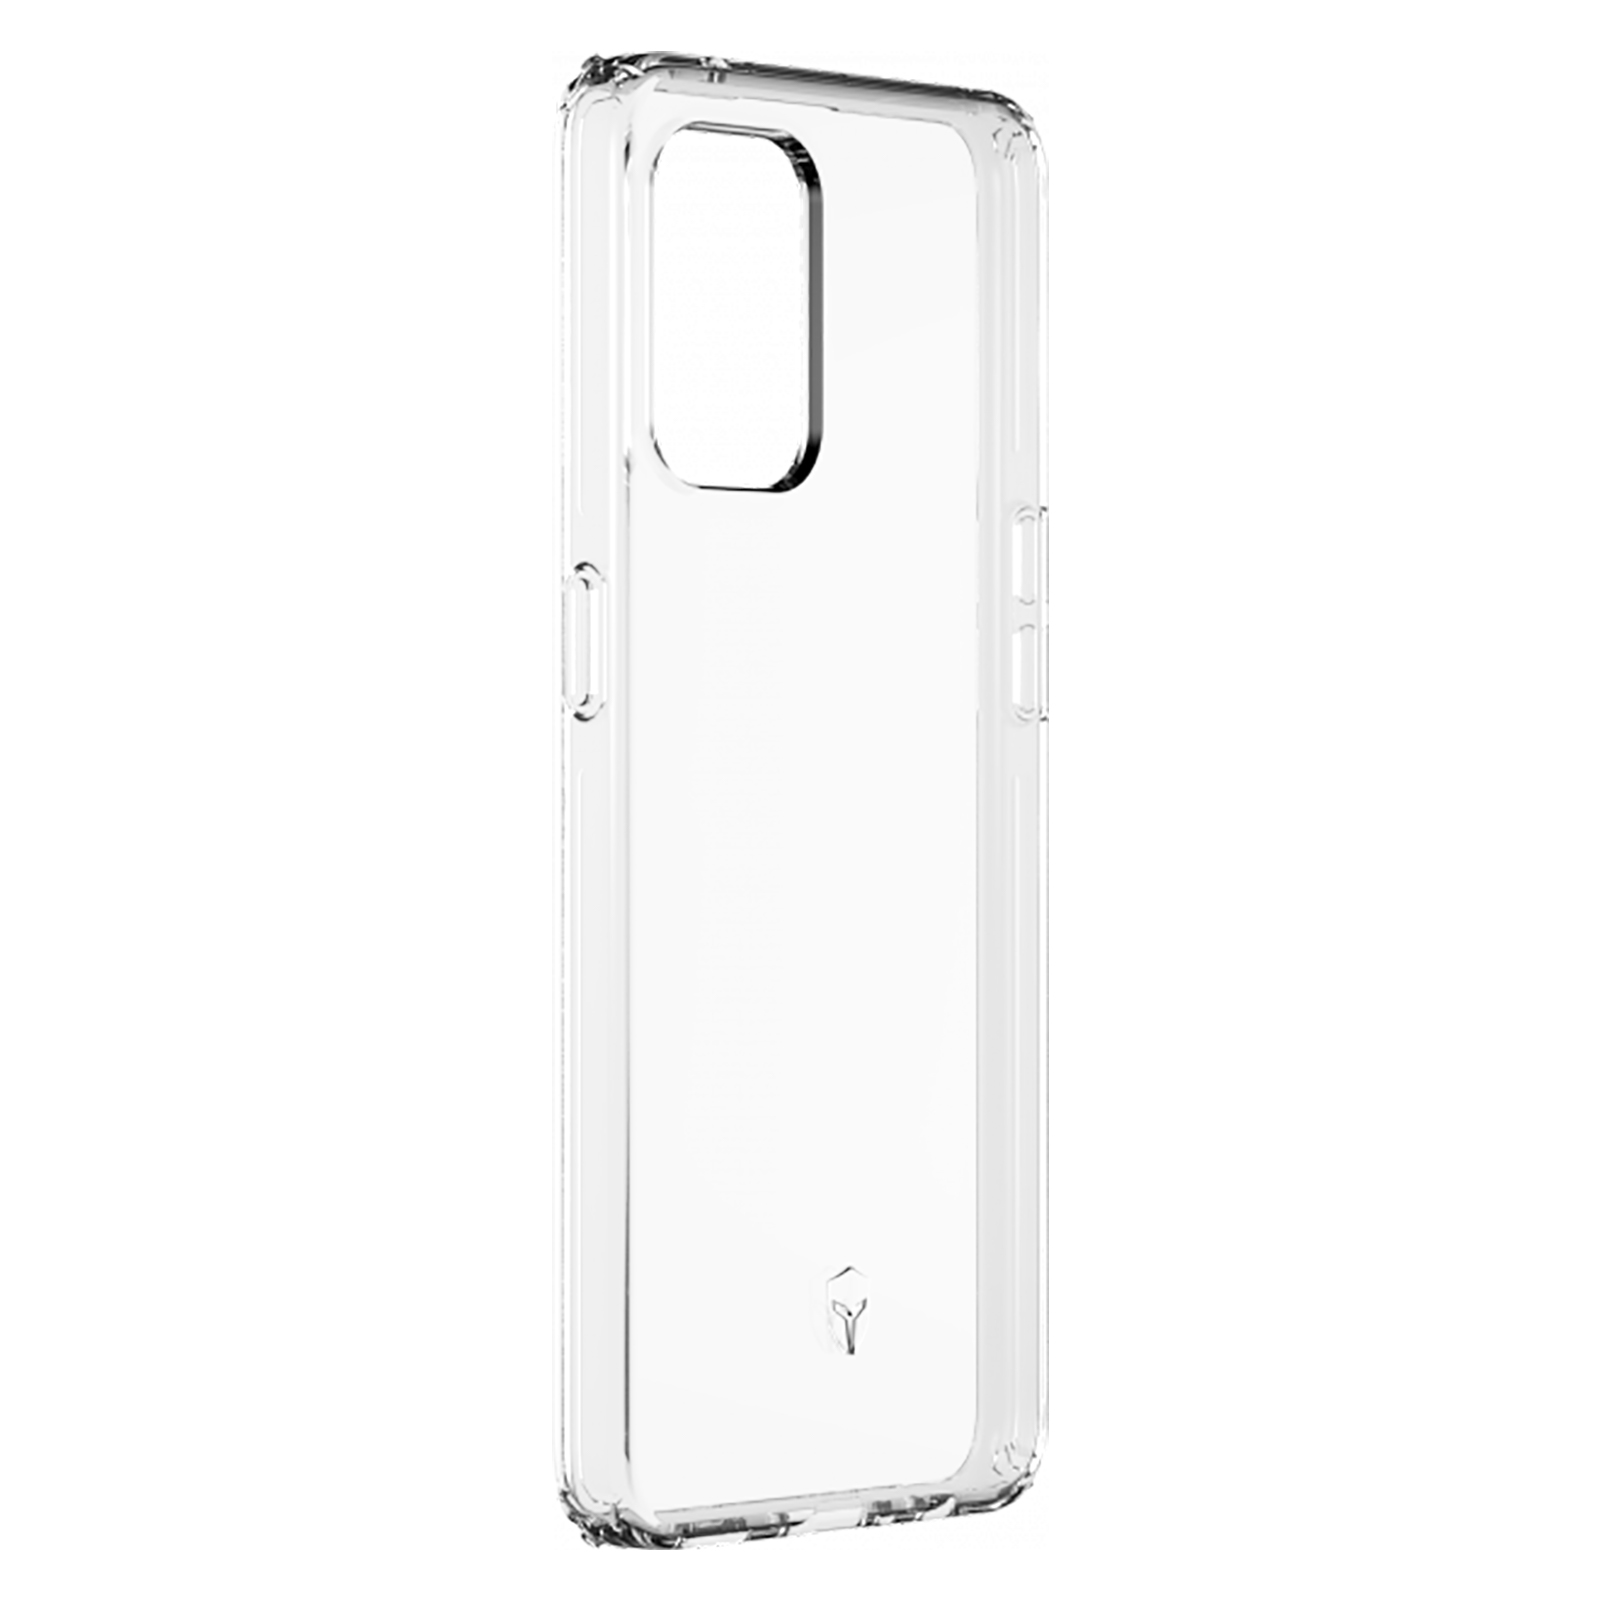 Backcover, CASE Series, 8 Lite, Reno Handyhülle Transparent Feel Oppo, FORCE